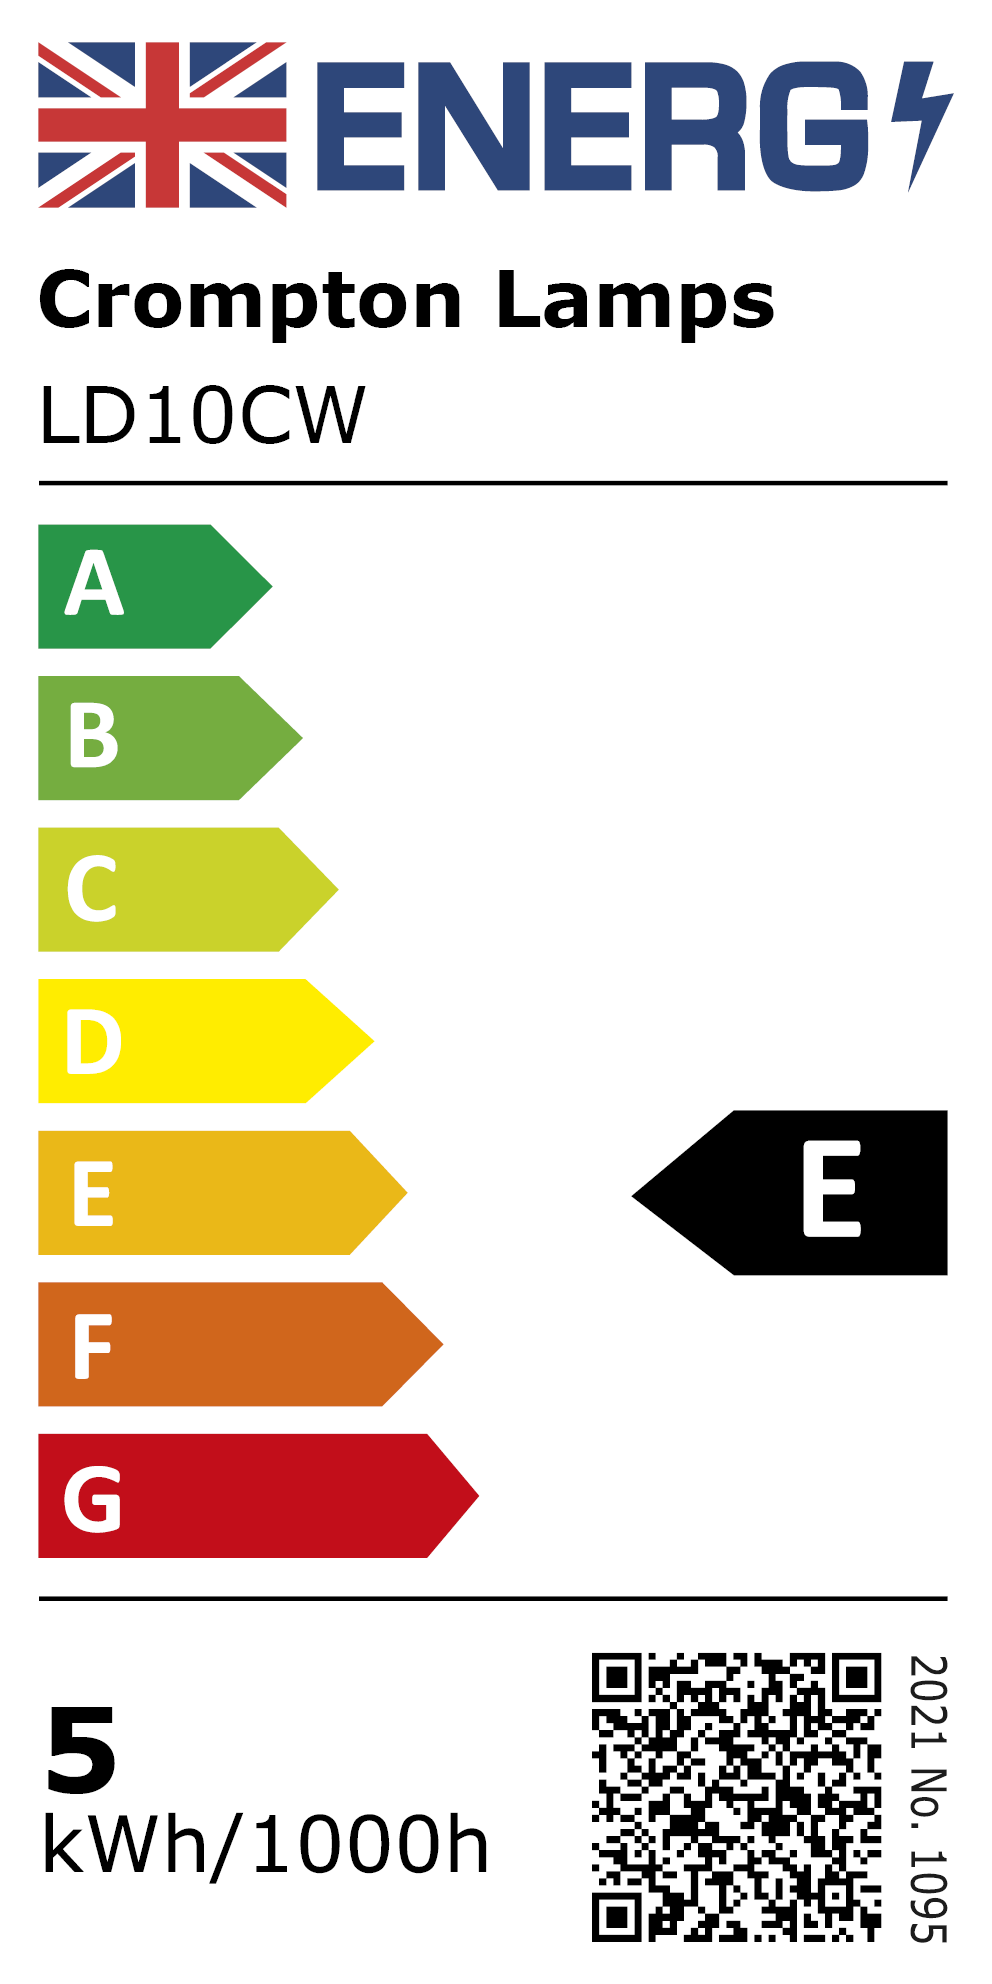 New 2021 Energy Rating Label: MPN LD10CW